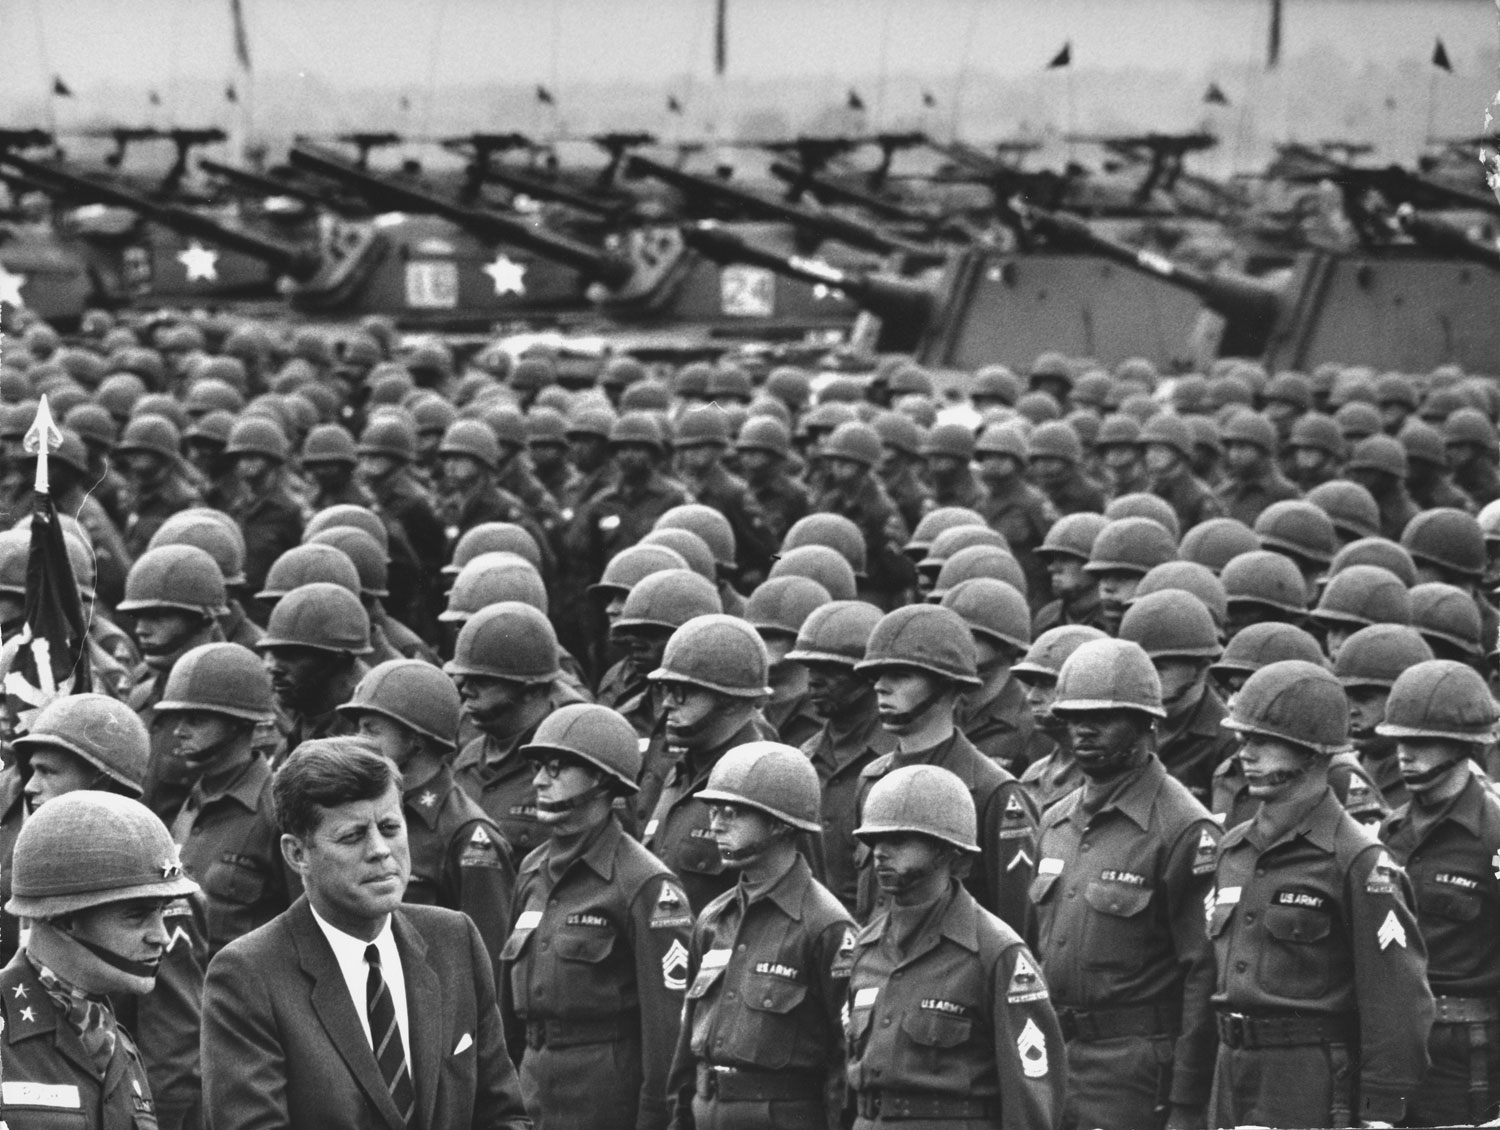 President John F. Kennedy (right), with Major General John R. Pugh (left), reviews the U.S. Army's 3rd Armored Division ("Spearhead"), West Germany, June 1963.